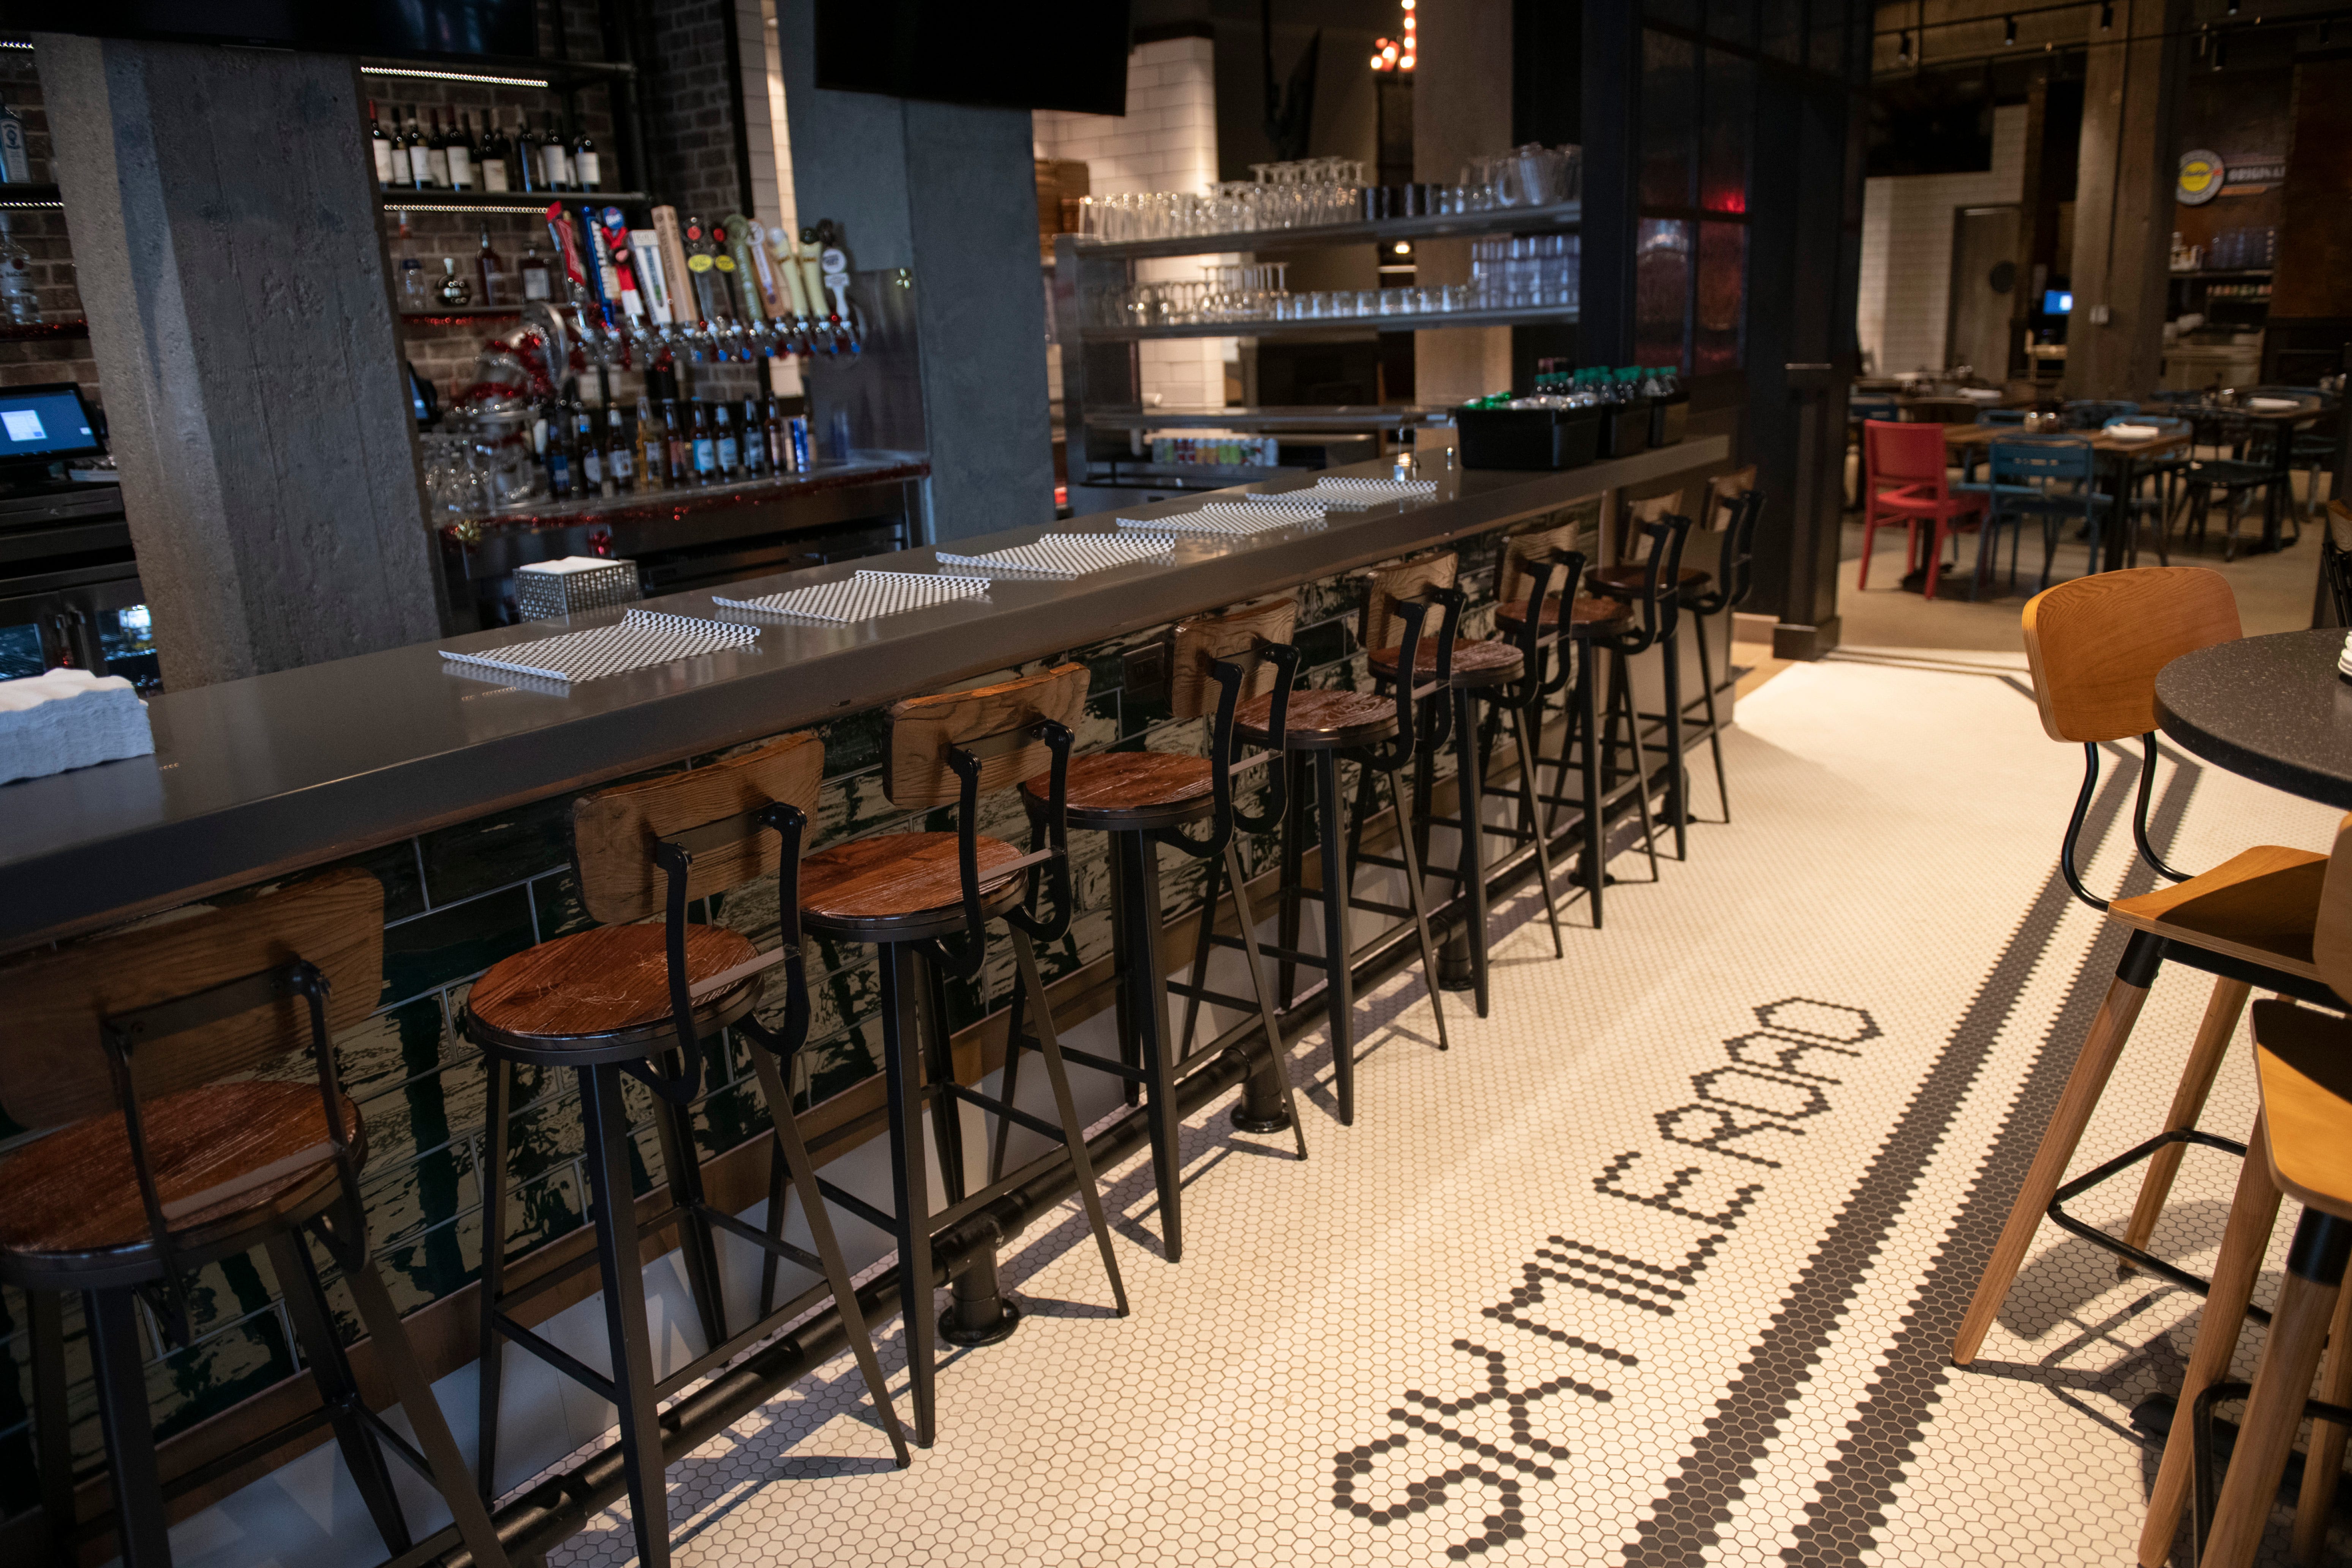 'Six Mile Road' is seen in the floor tile in the bar area inside Buddy's Pizza's new downtown restaurant, a nod to the original 1946 Buddy's Pizza being located at Six Mile and Conant streets.